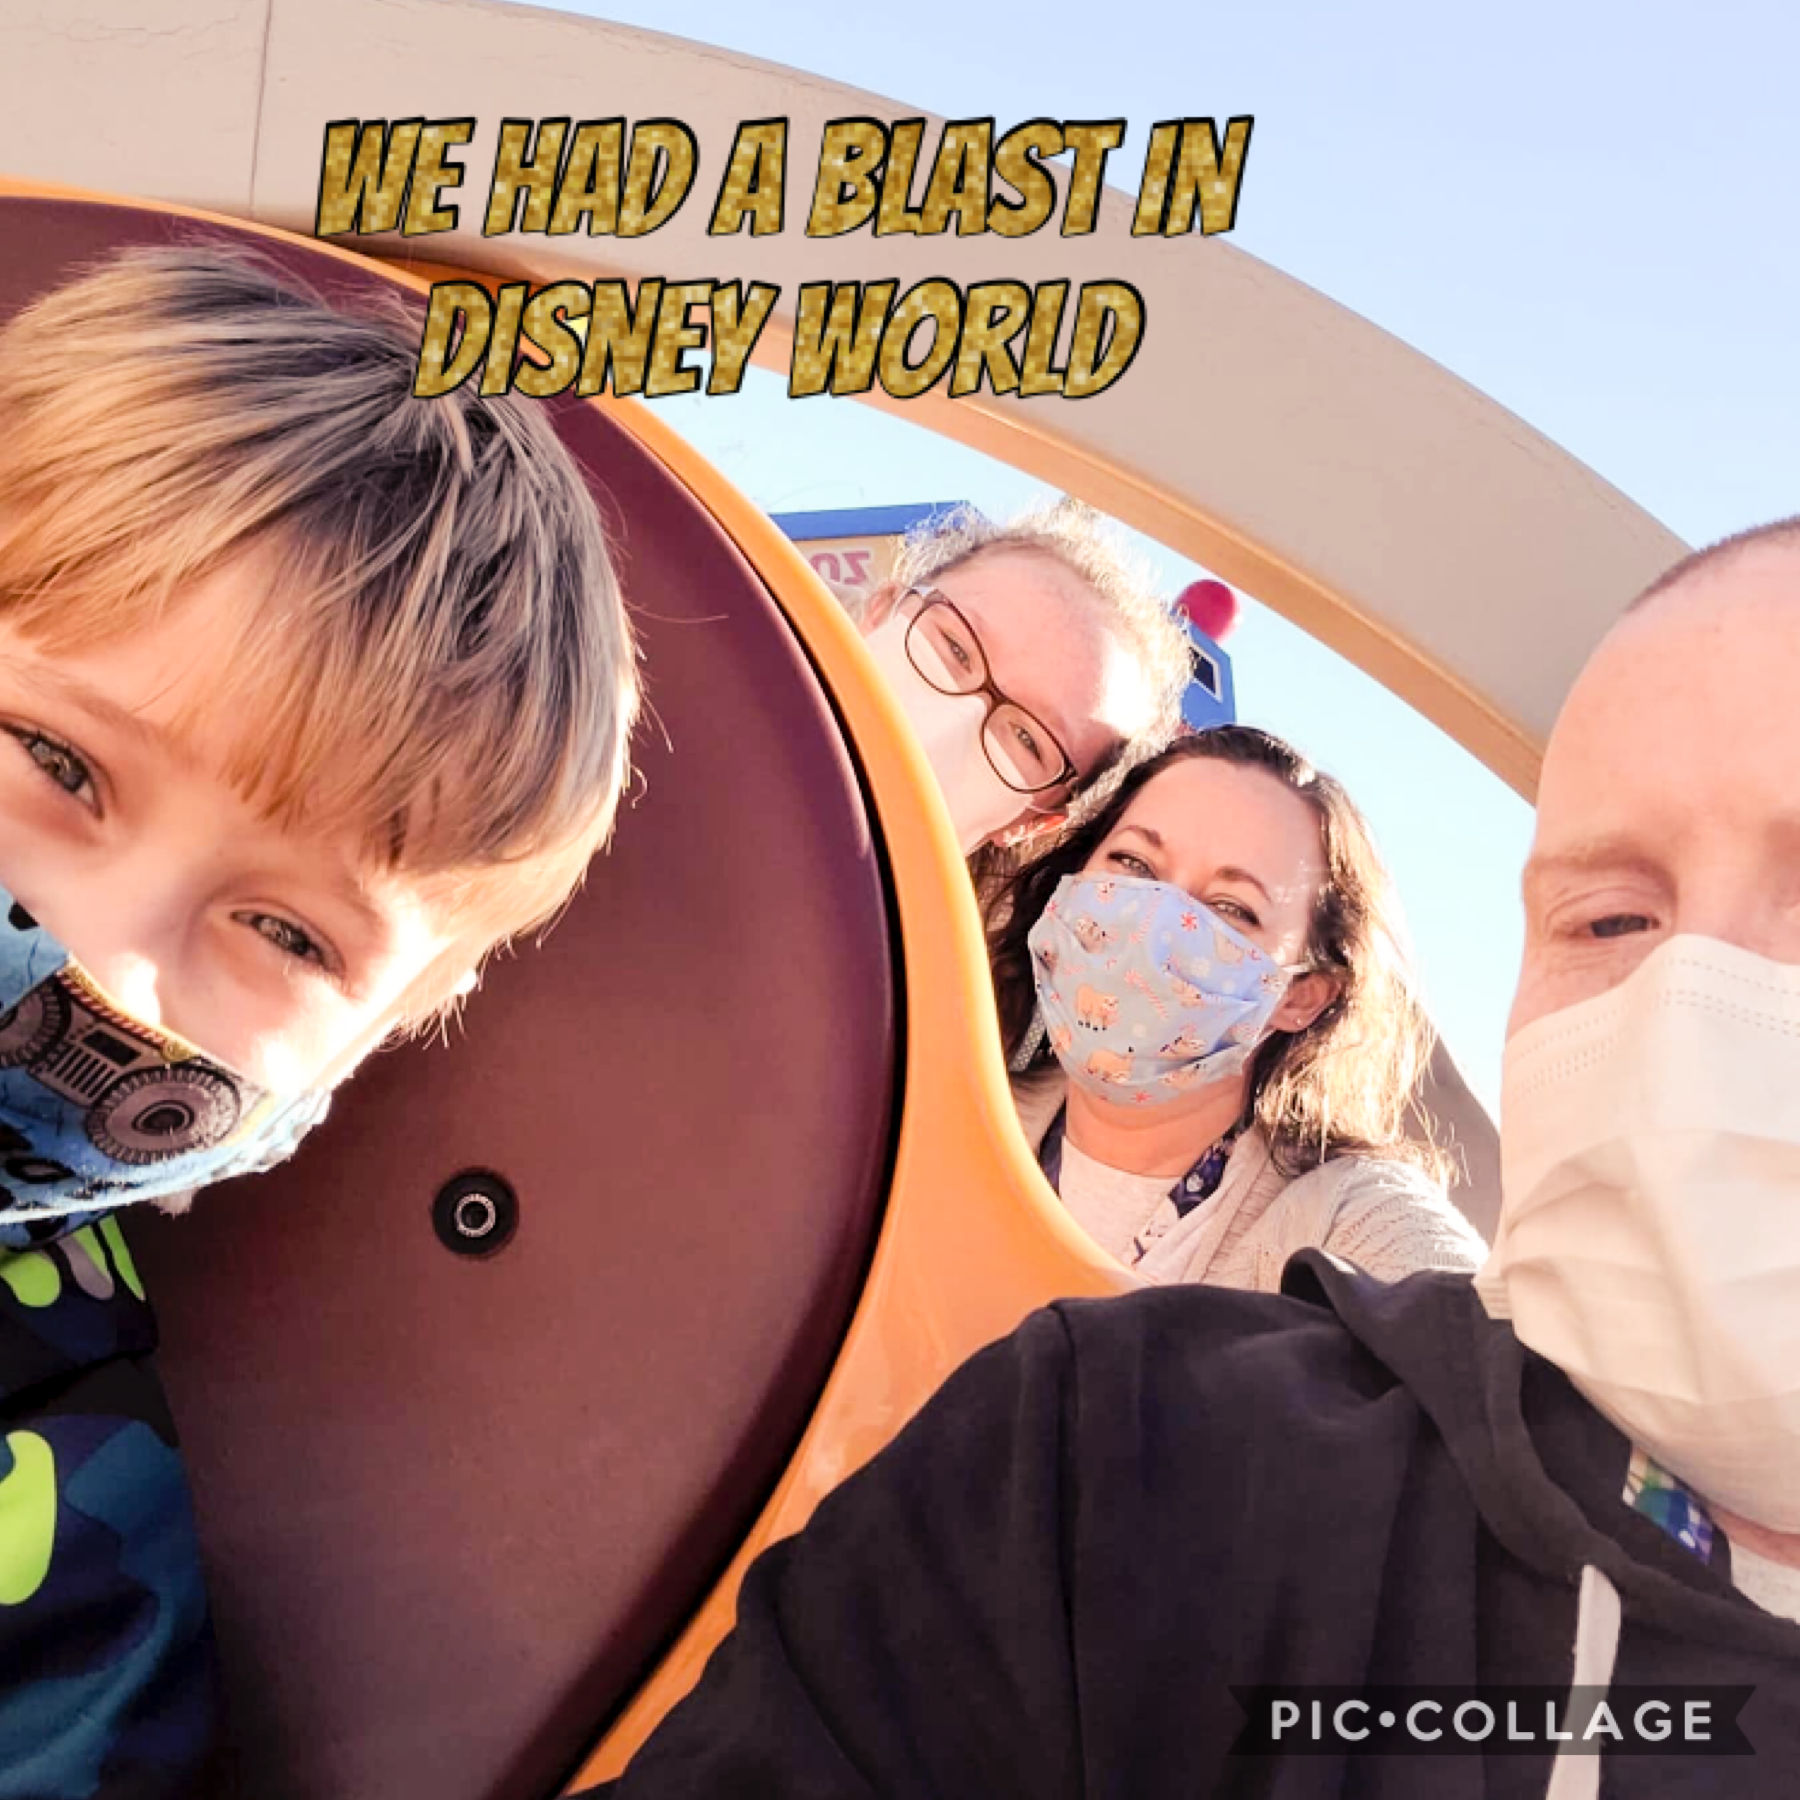 We had the best time ever at Disney world 